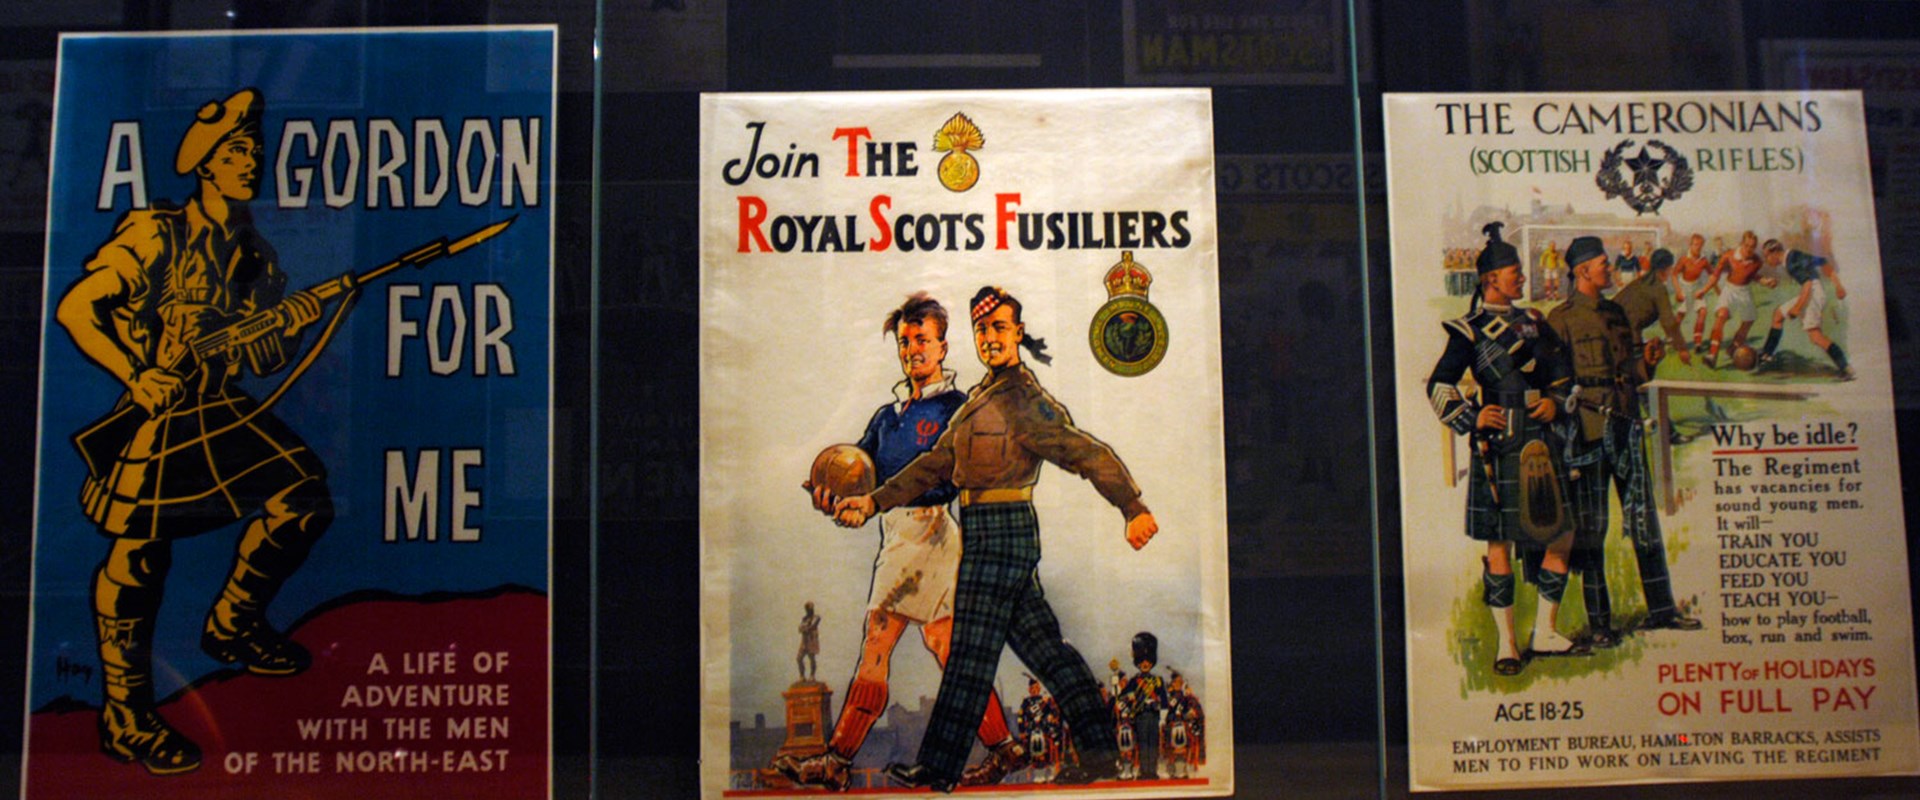 Three recruitment posters for different Scottish divisions of the Royal Forces.